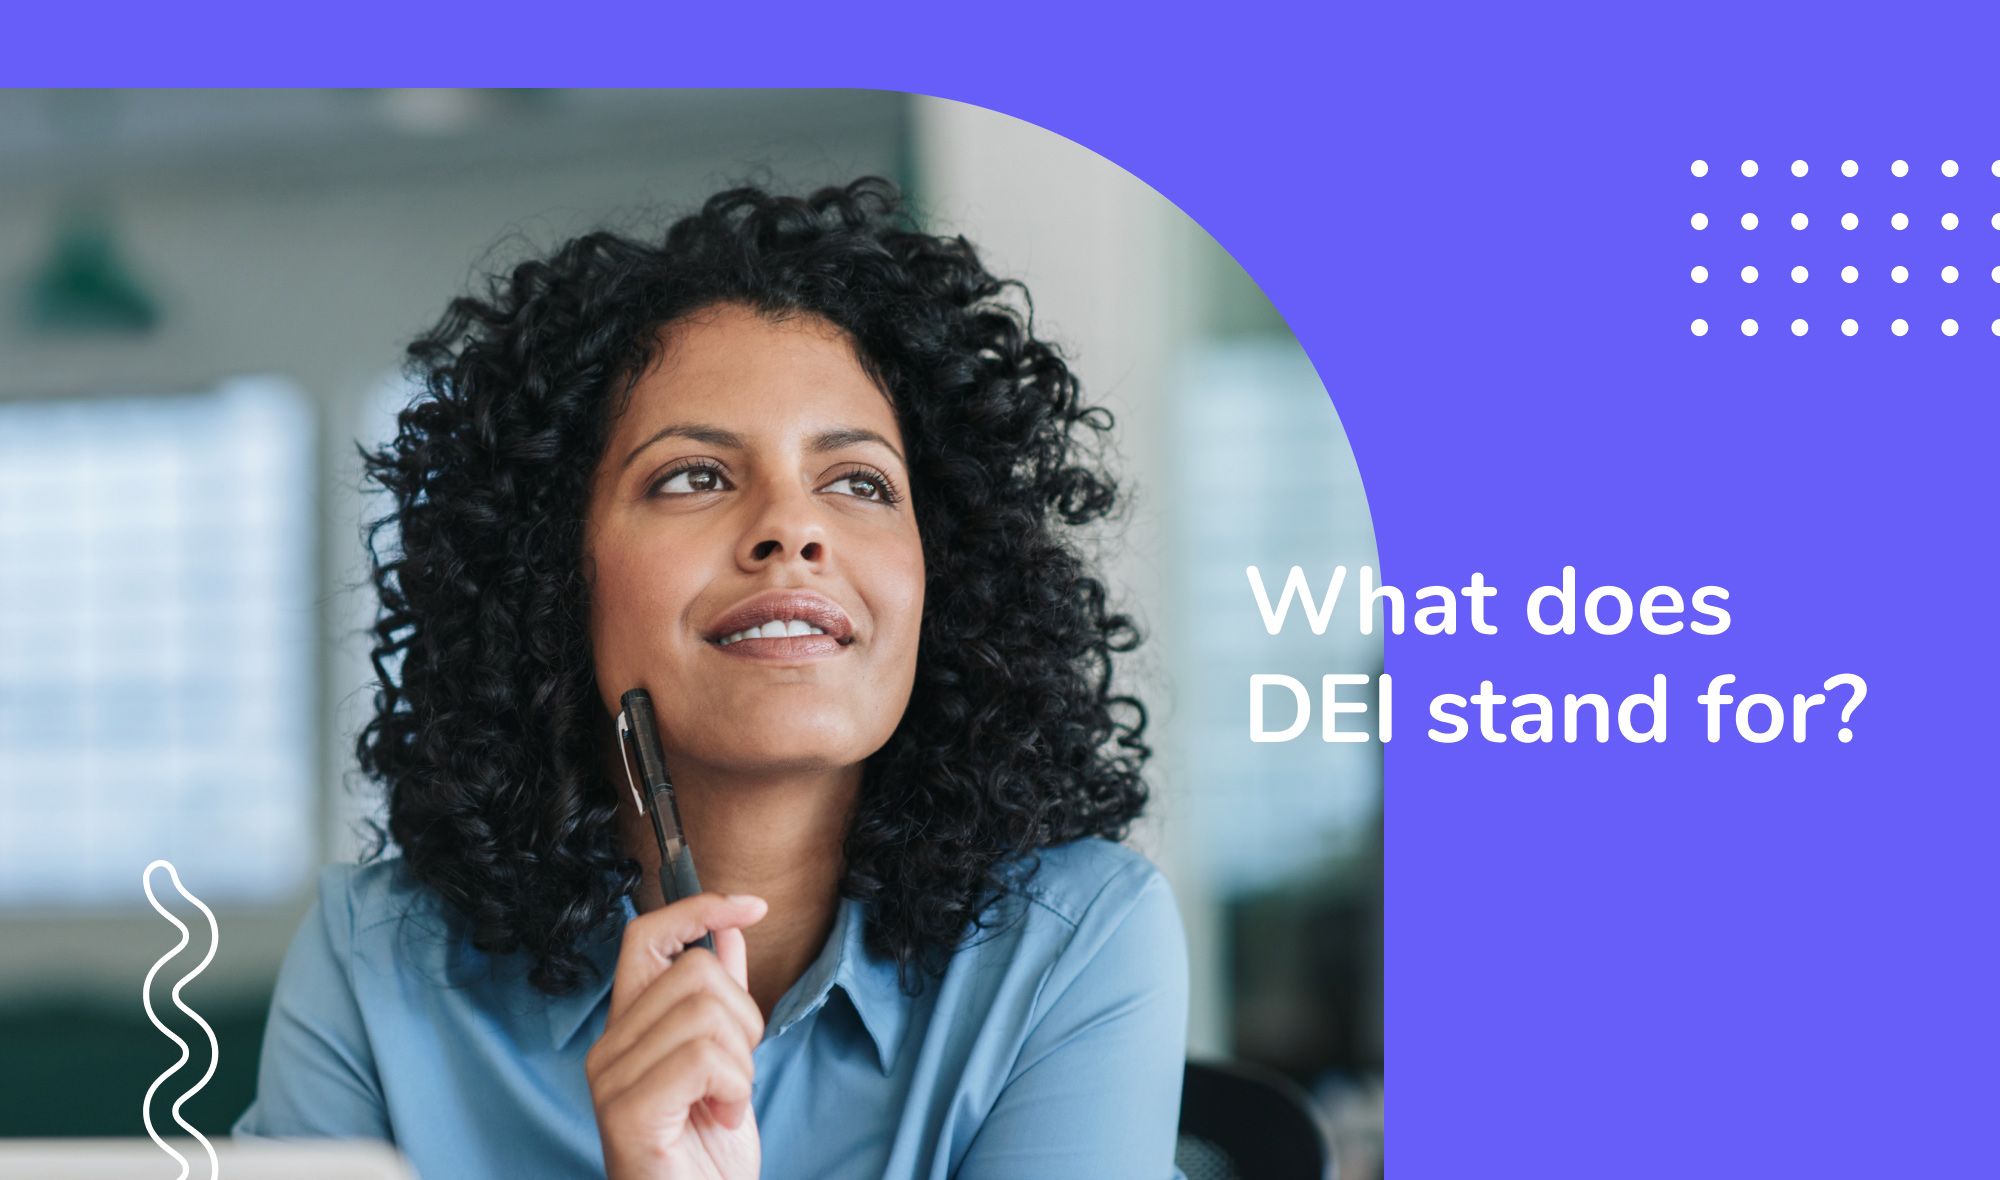 DEI - What does DEI stand for?